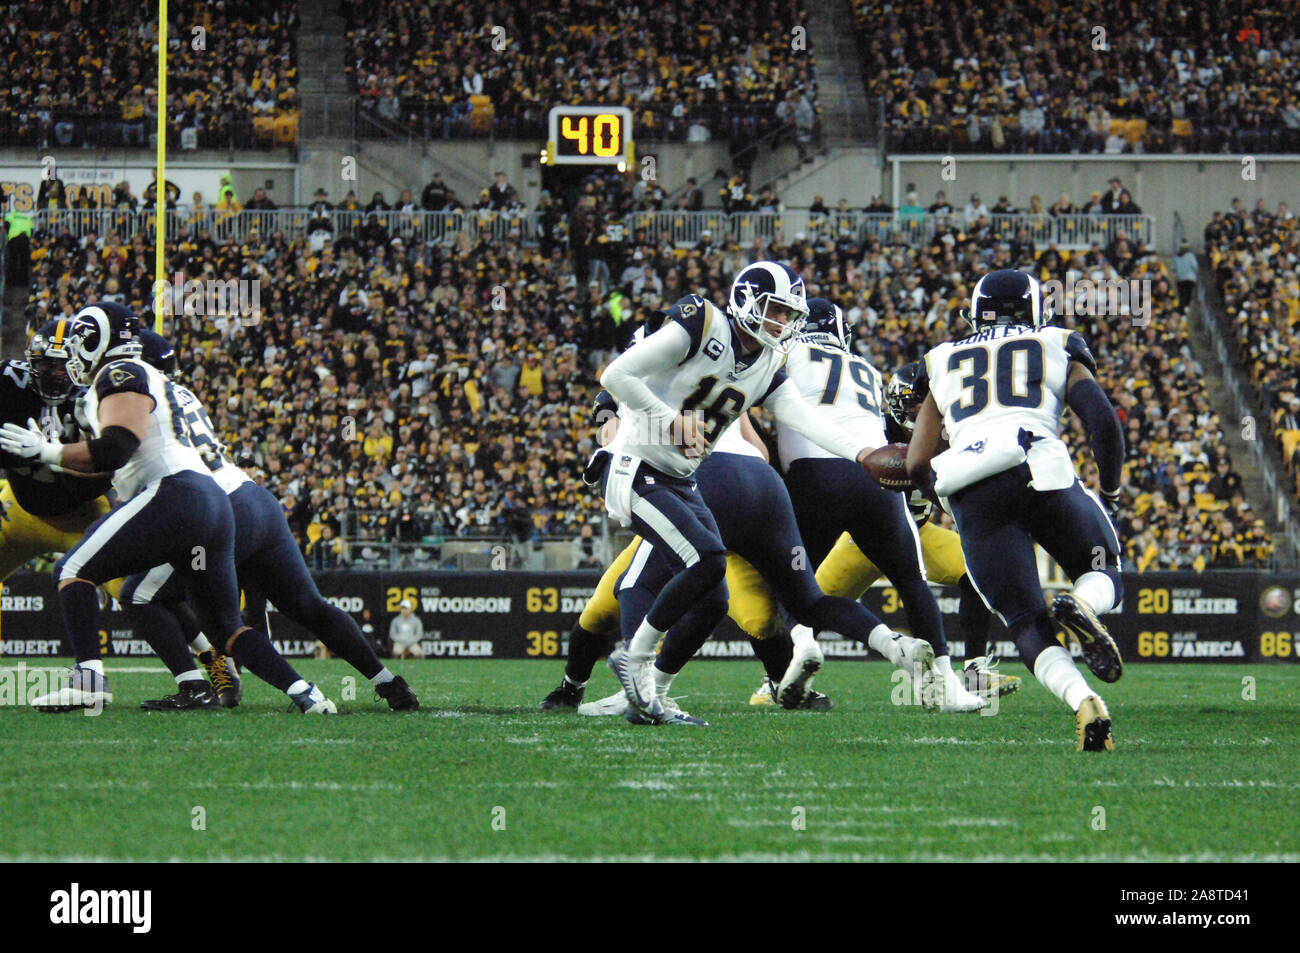 Pittsburgh, PA, USA. 10th Nov, 2019. Jared Goff #16 (QB) during the Pittsburgh Steelers vs Los Angeles Rams at Heinz Field in Pittsburgh, PA. Jason Pohuski/CSM/Alamy Live News Stock Photo